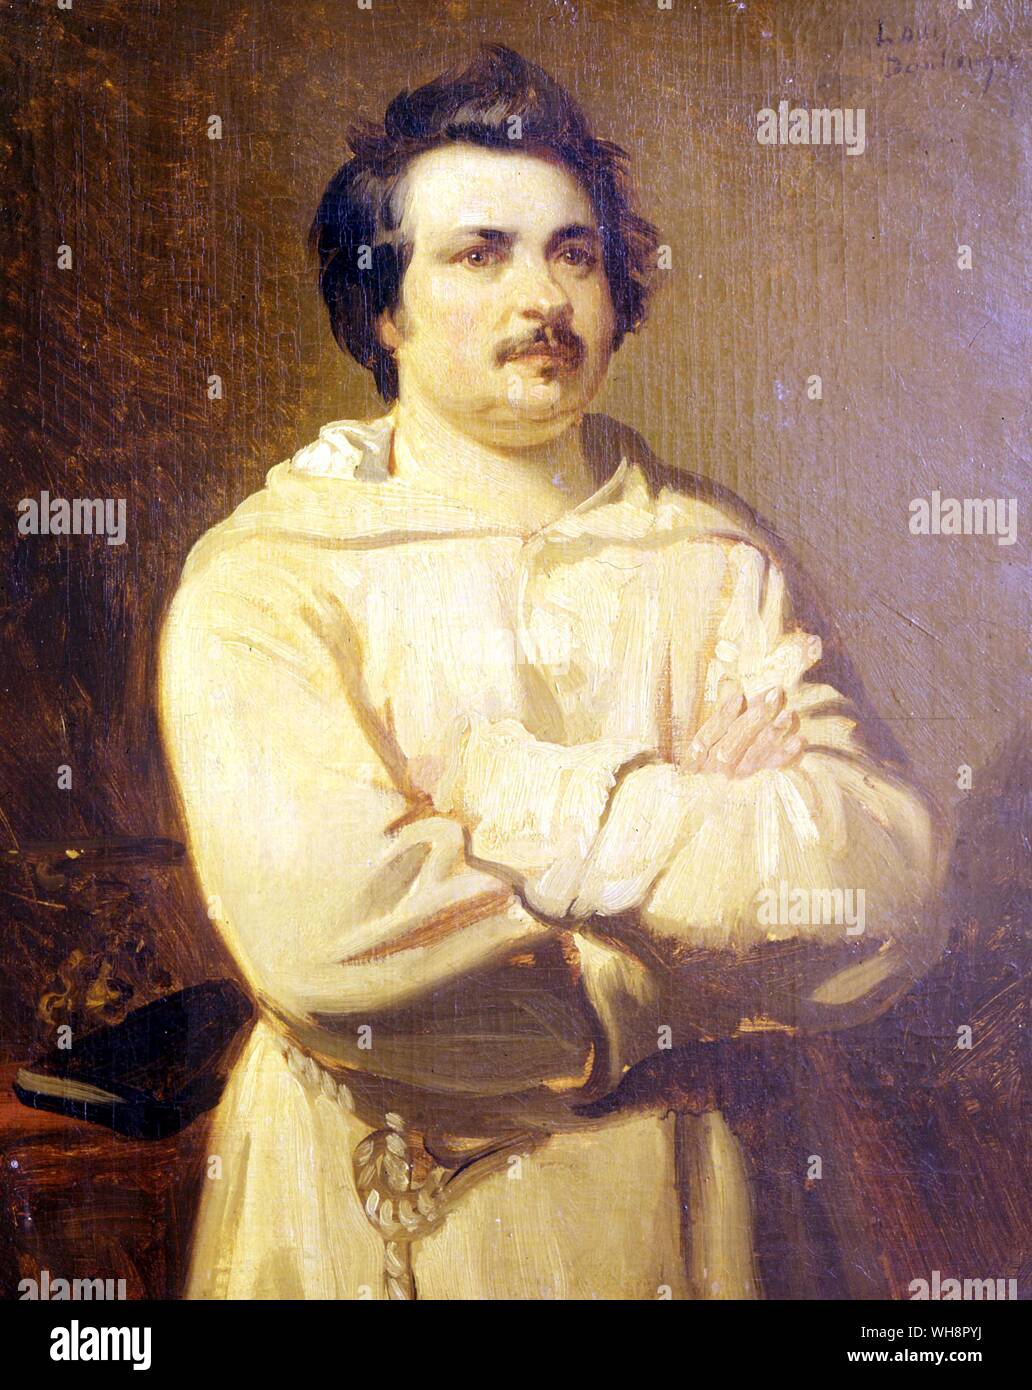 Front jacket illustration - Balzac wearing his monk's robe, by Boulanger. Also Page 76 - Balzac in his monk's habit by Louis Boulanger, 1829. Gautier wrote of it: There is in this head of a monk and a trooper, a rare mixture of reflection and good humour, of resolution and high temper: the thinker and the man of action mingle in an odd harmony. Stock Photo